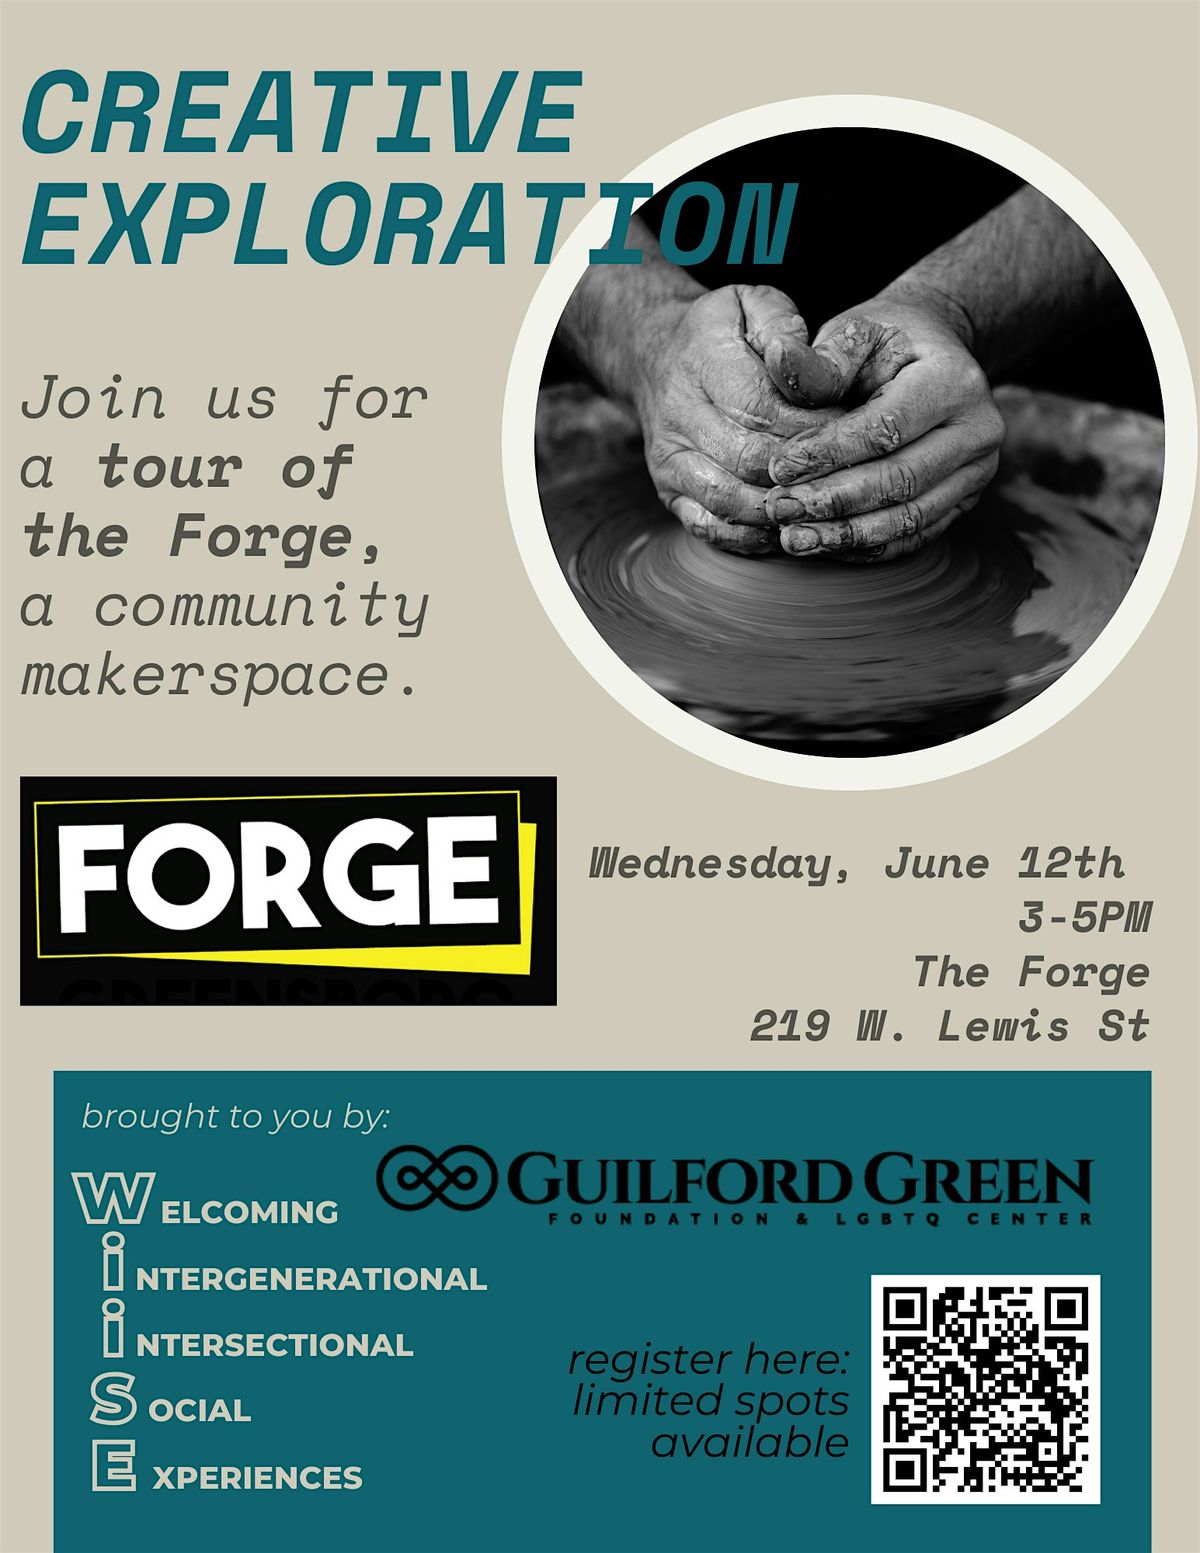 Wednesday, June 12th 3-5 pm Tour of the FORGE